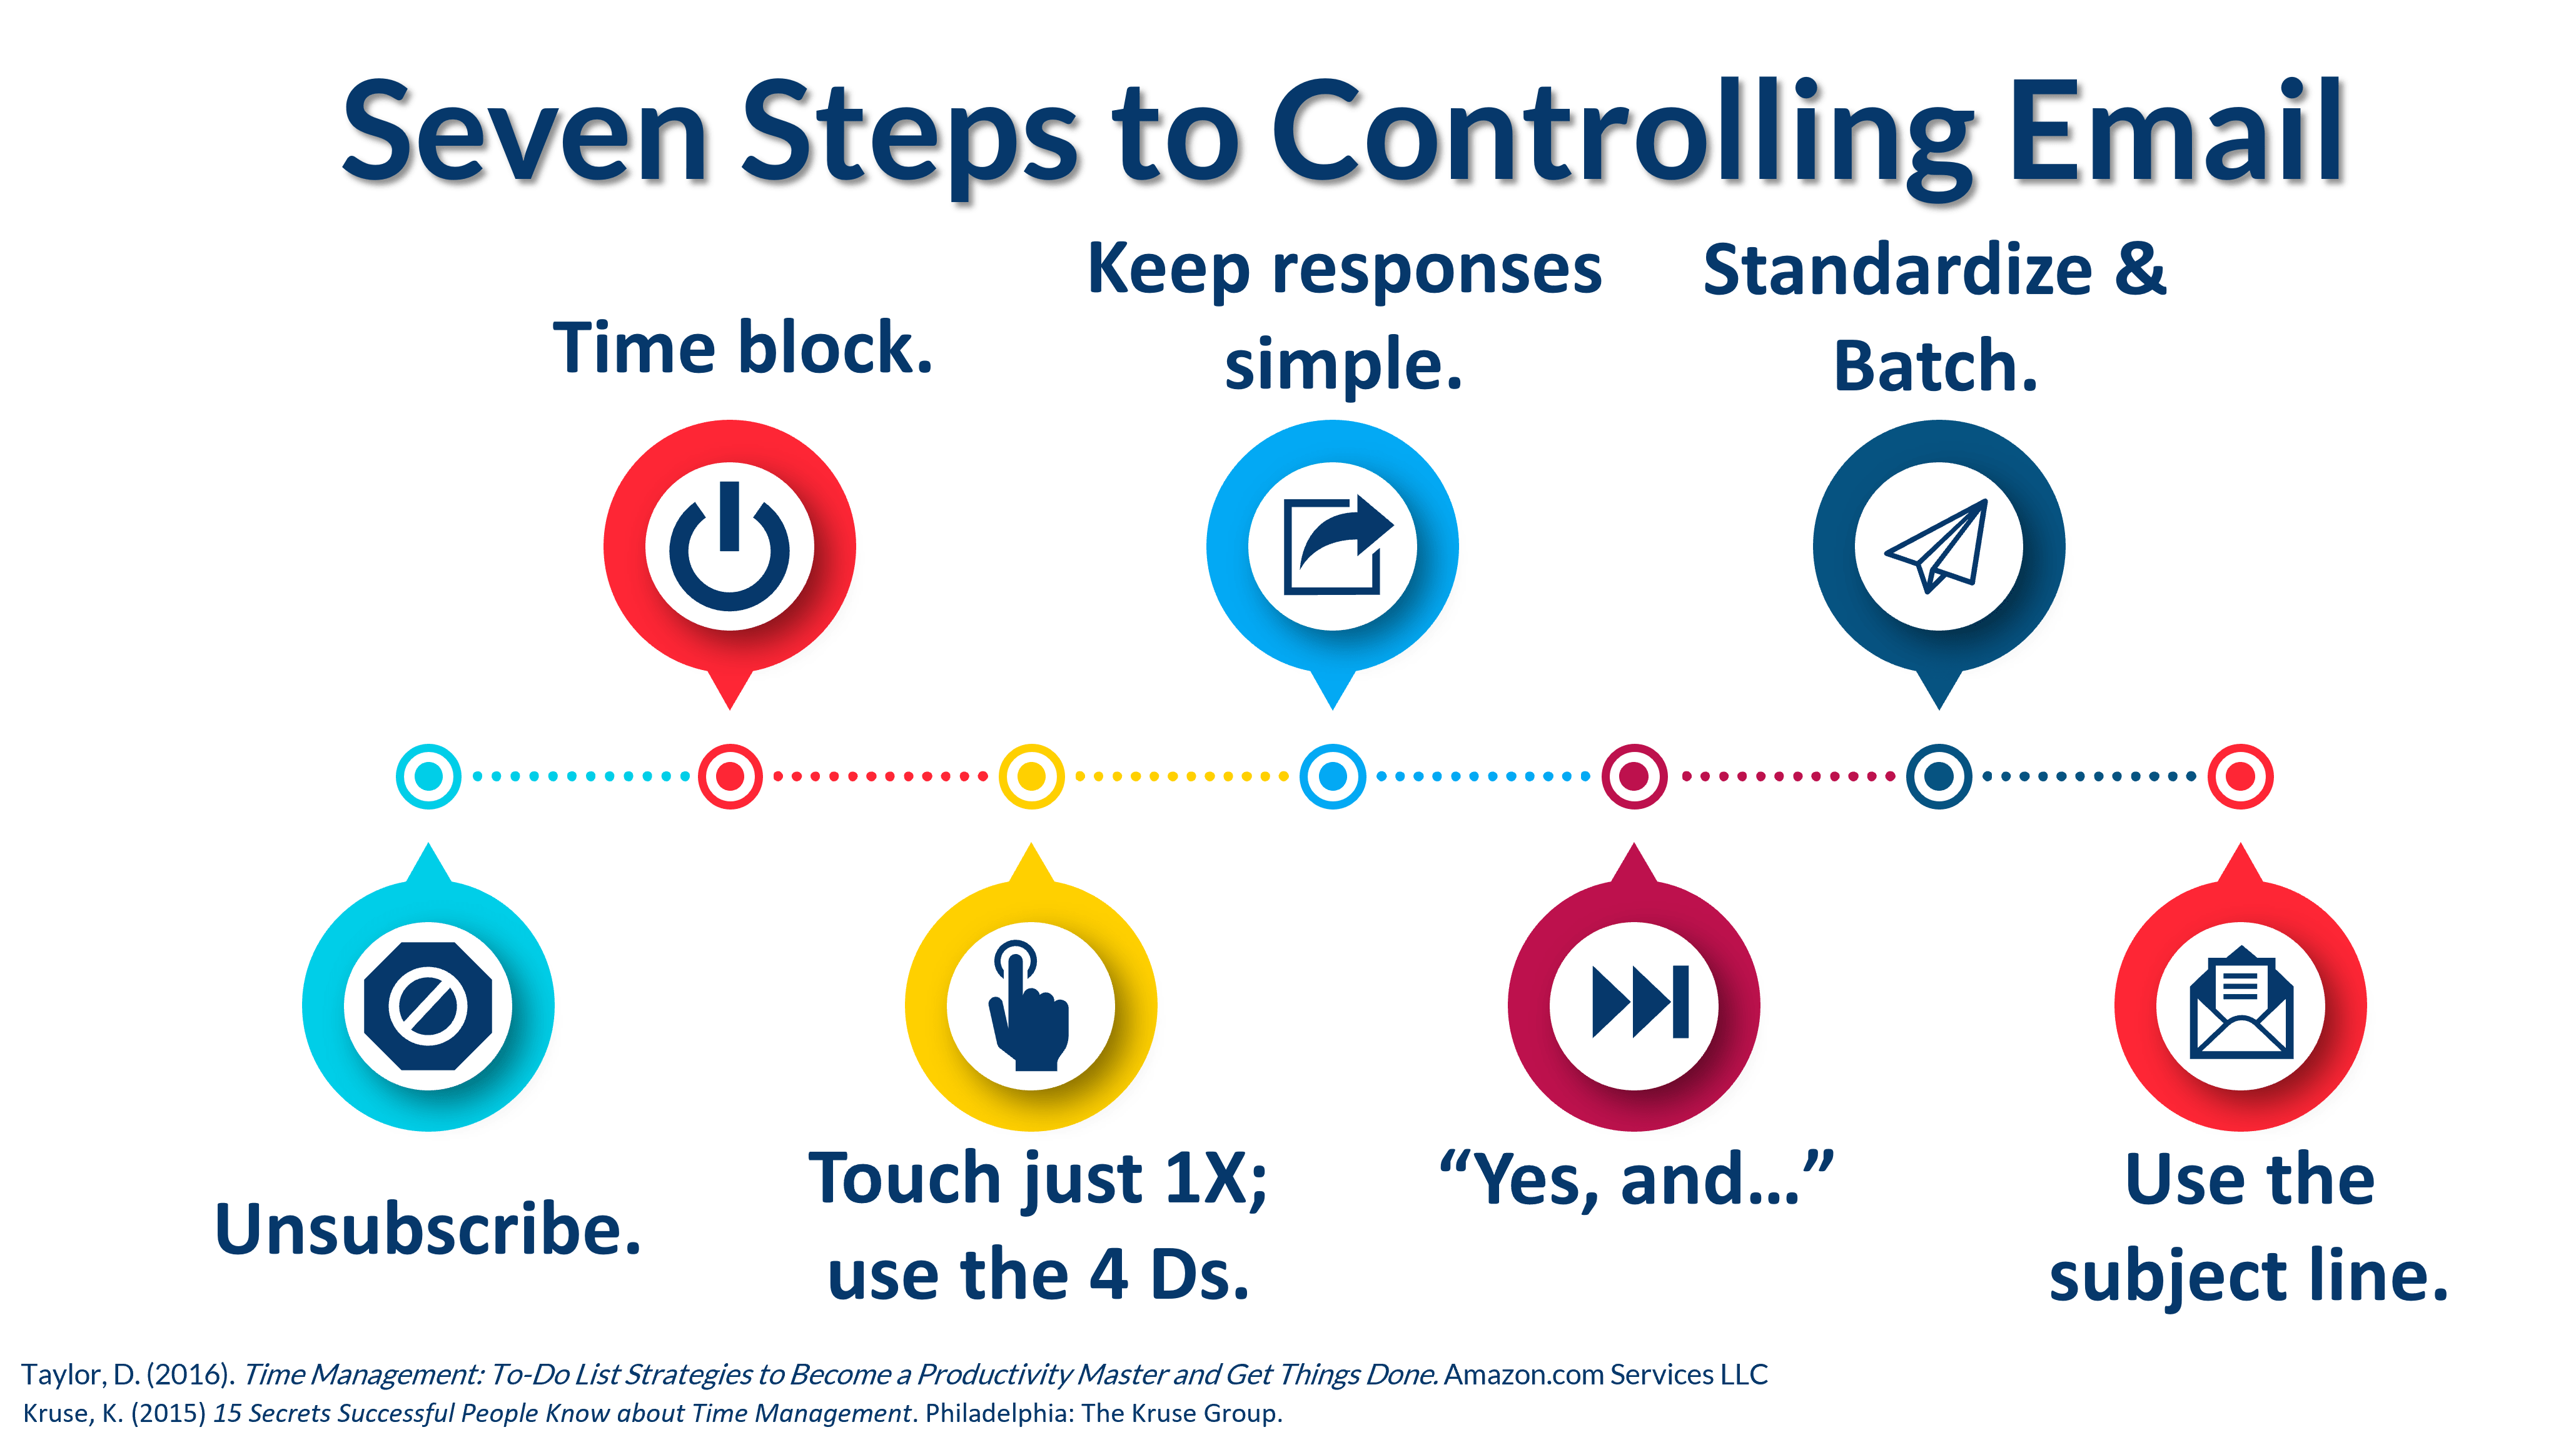 Seven Steps for Controlling Email